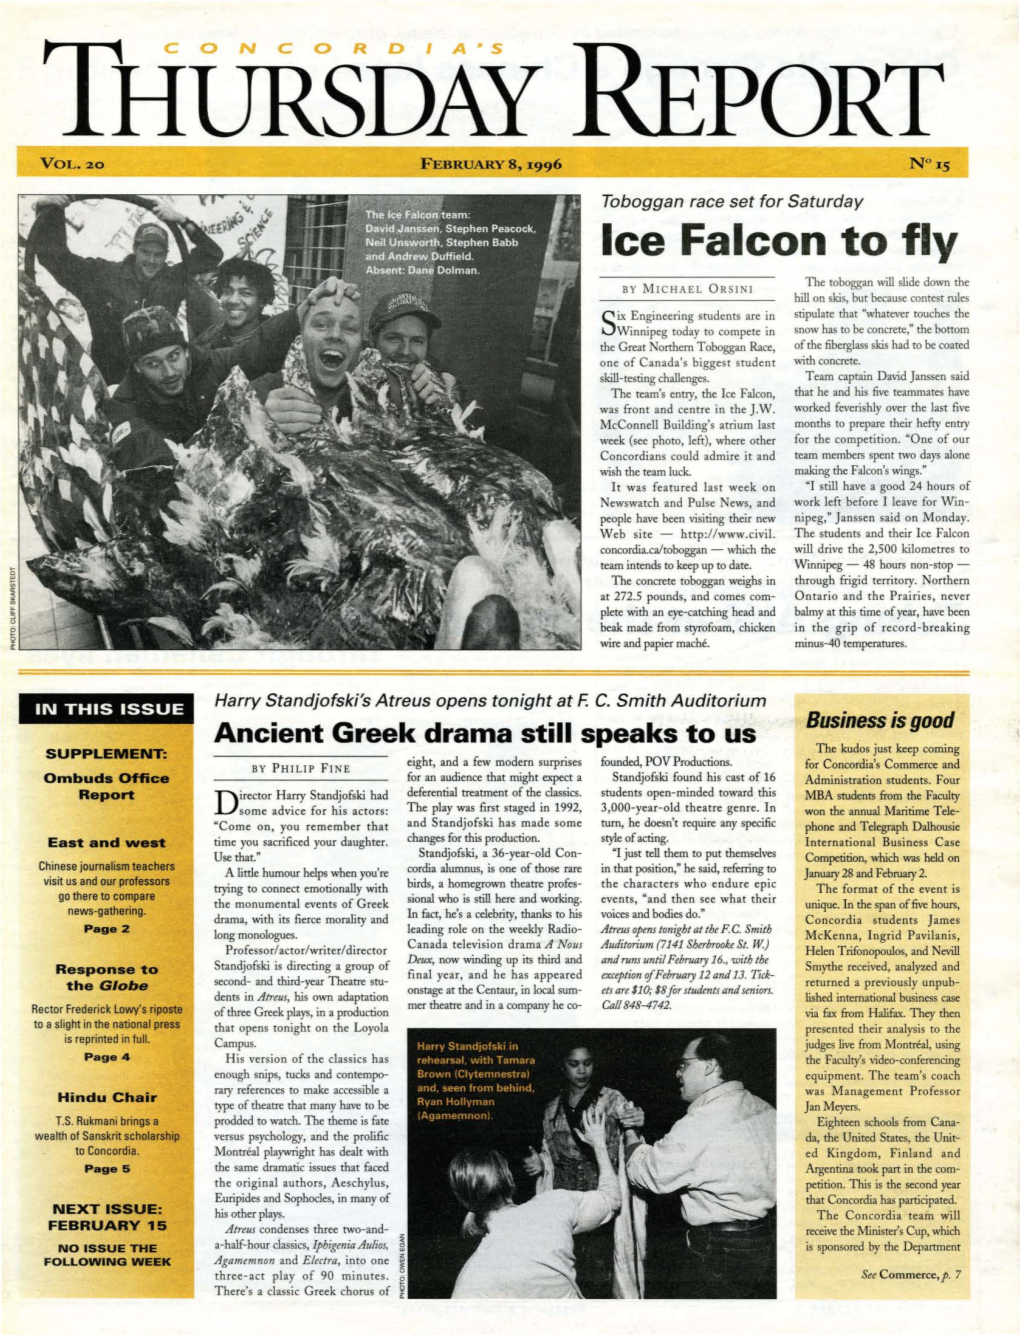 Ice Falcon to Fly